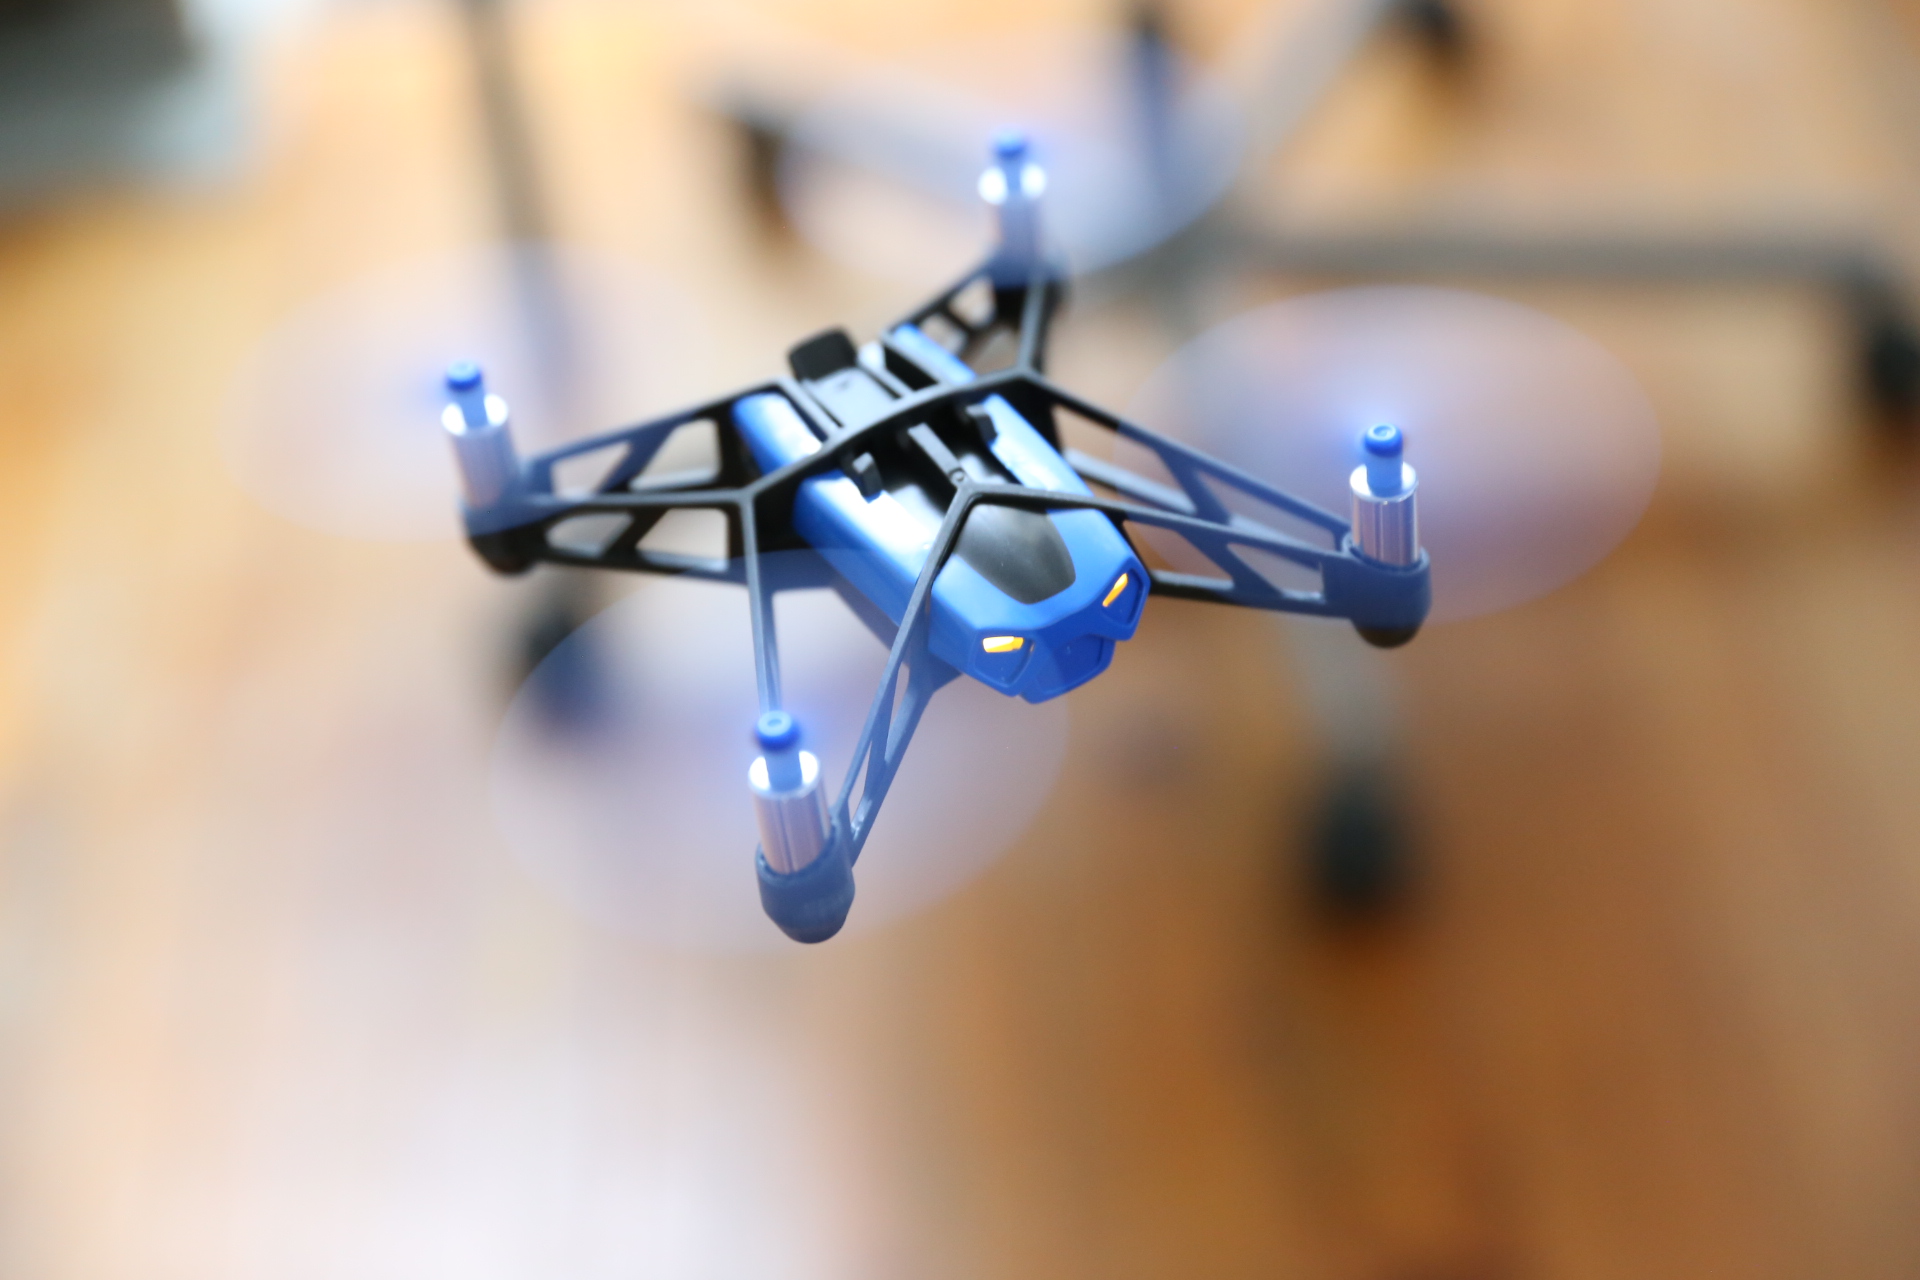 Parrot Jumping Sumo And Rolling Spider Bots Best For Drone Newcomers TechCrunch